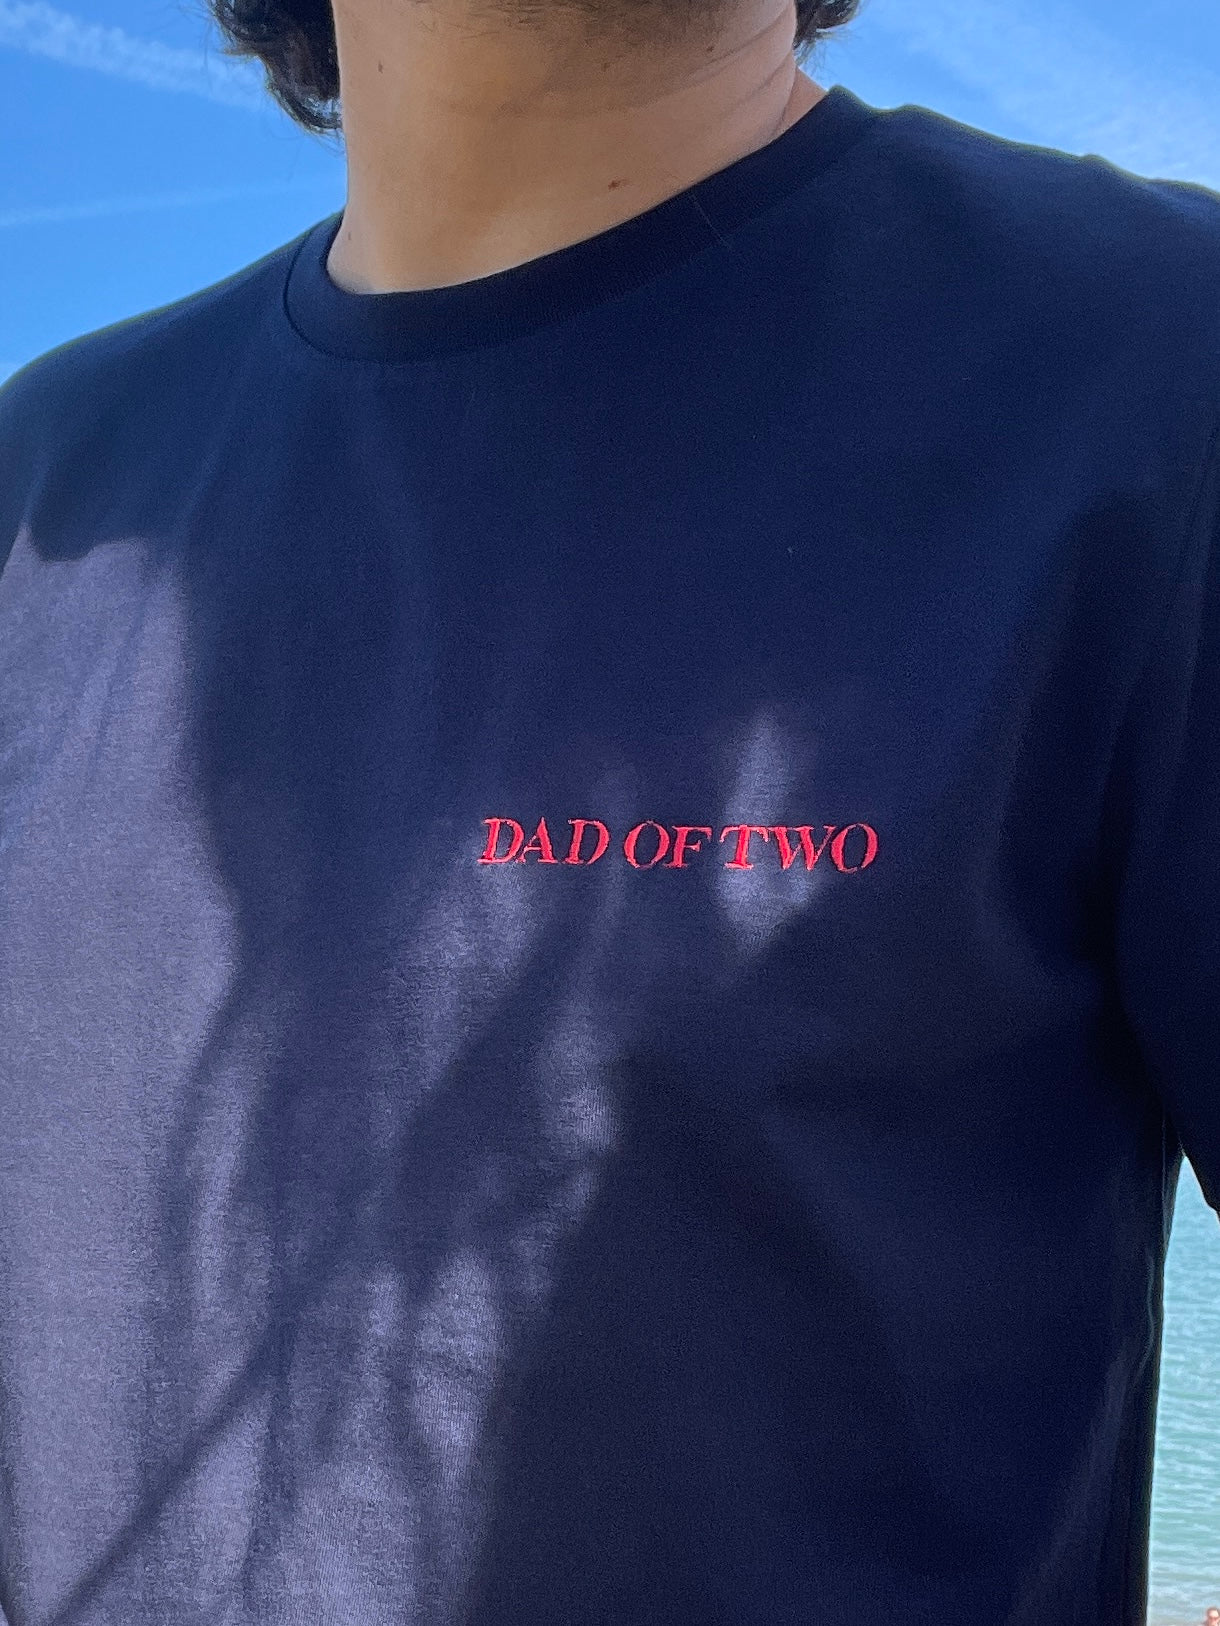 EMBROIDERED T-SHIRT DAD OF ONE, DAD OF TWO, DAD OF THREE, DAD OF FOUR...